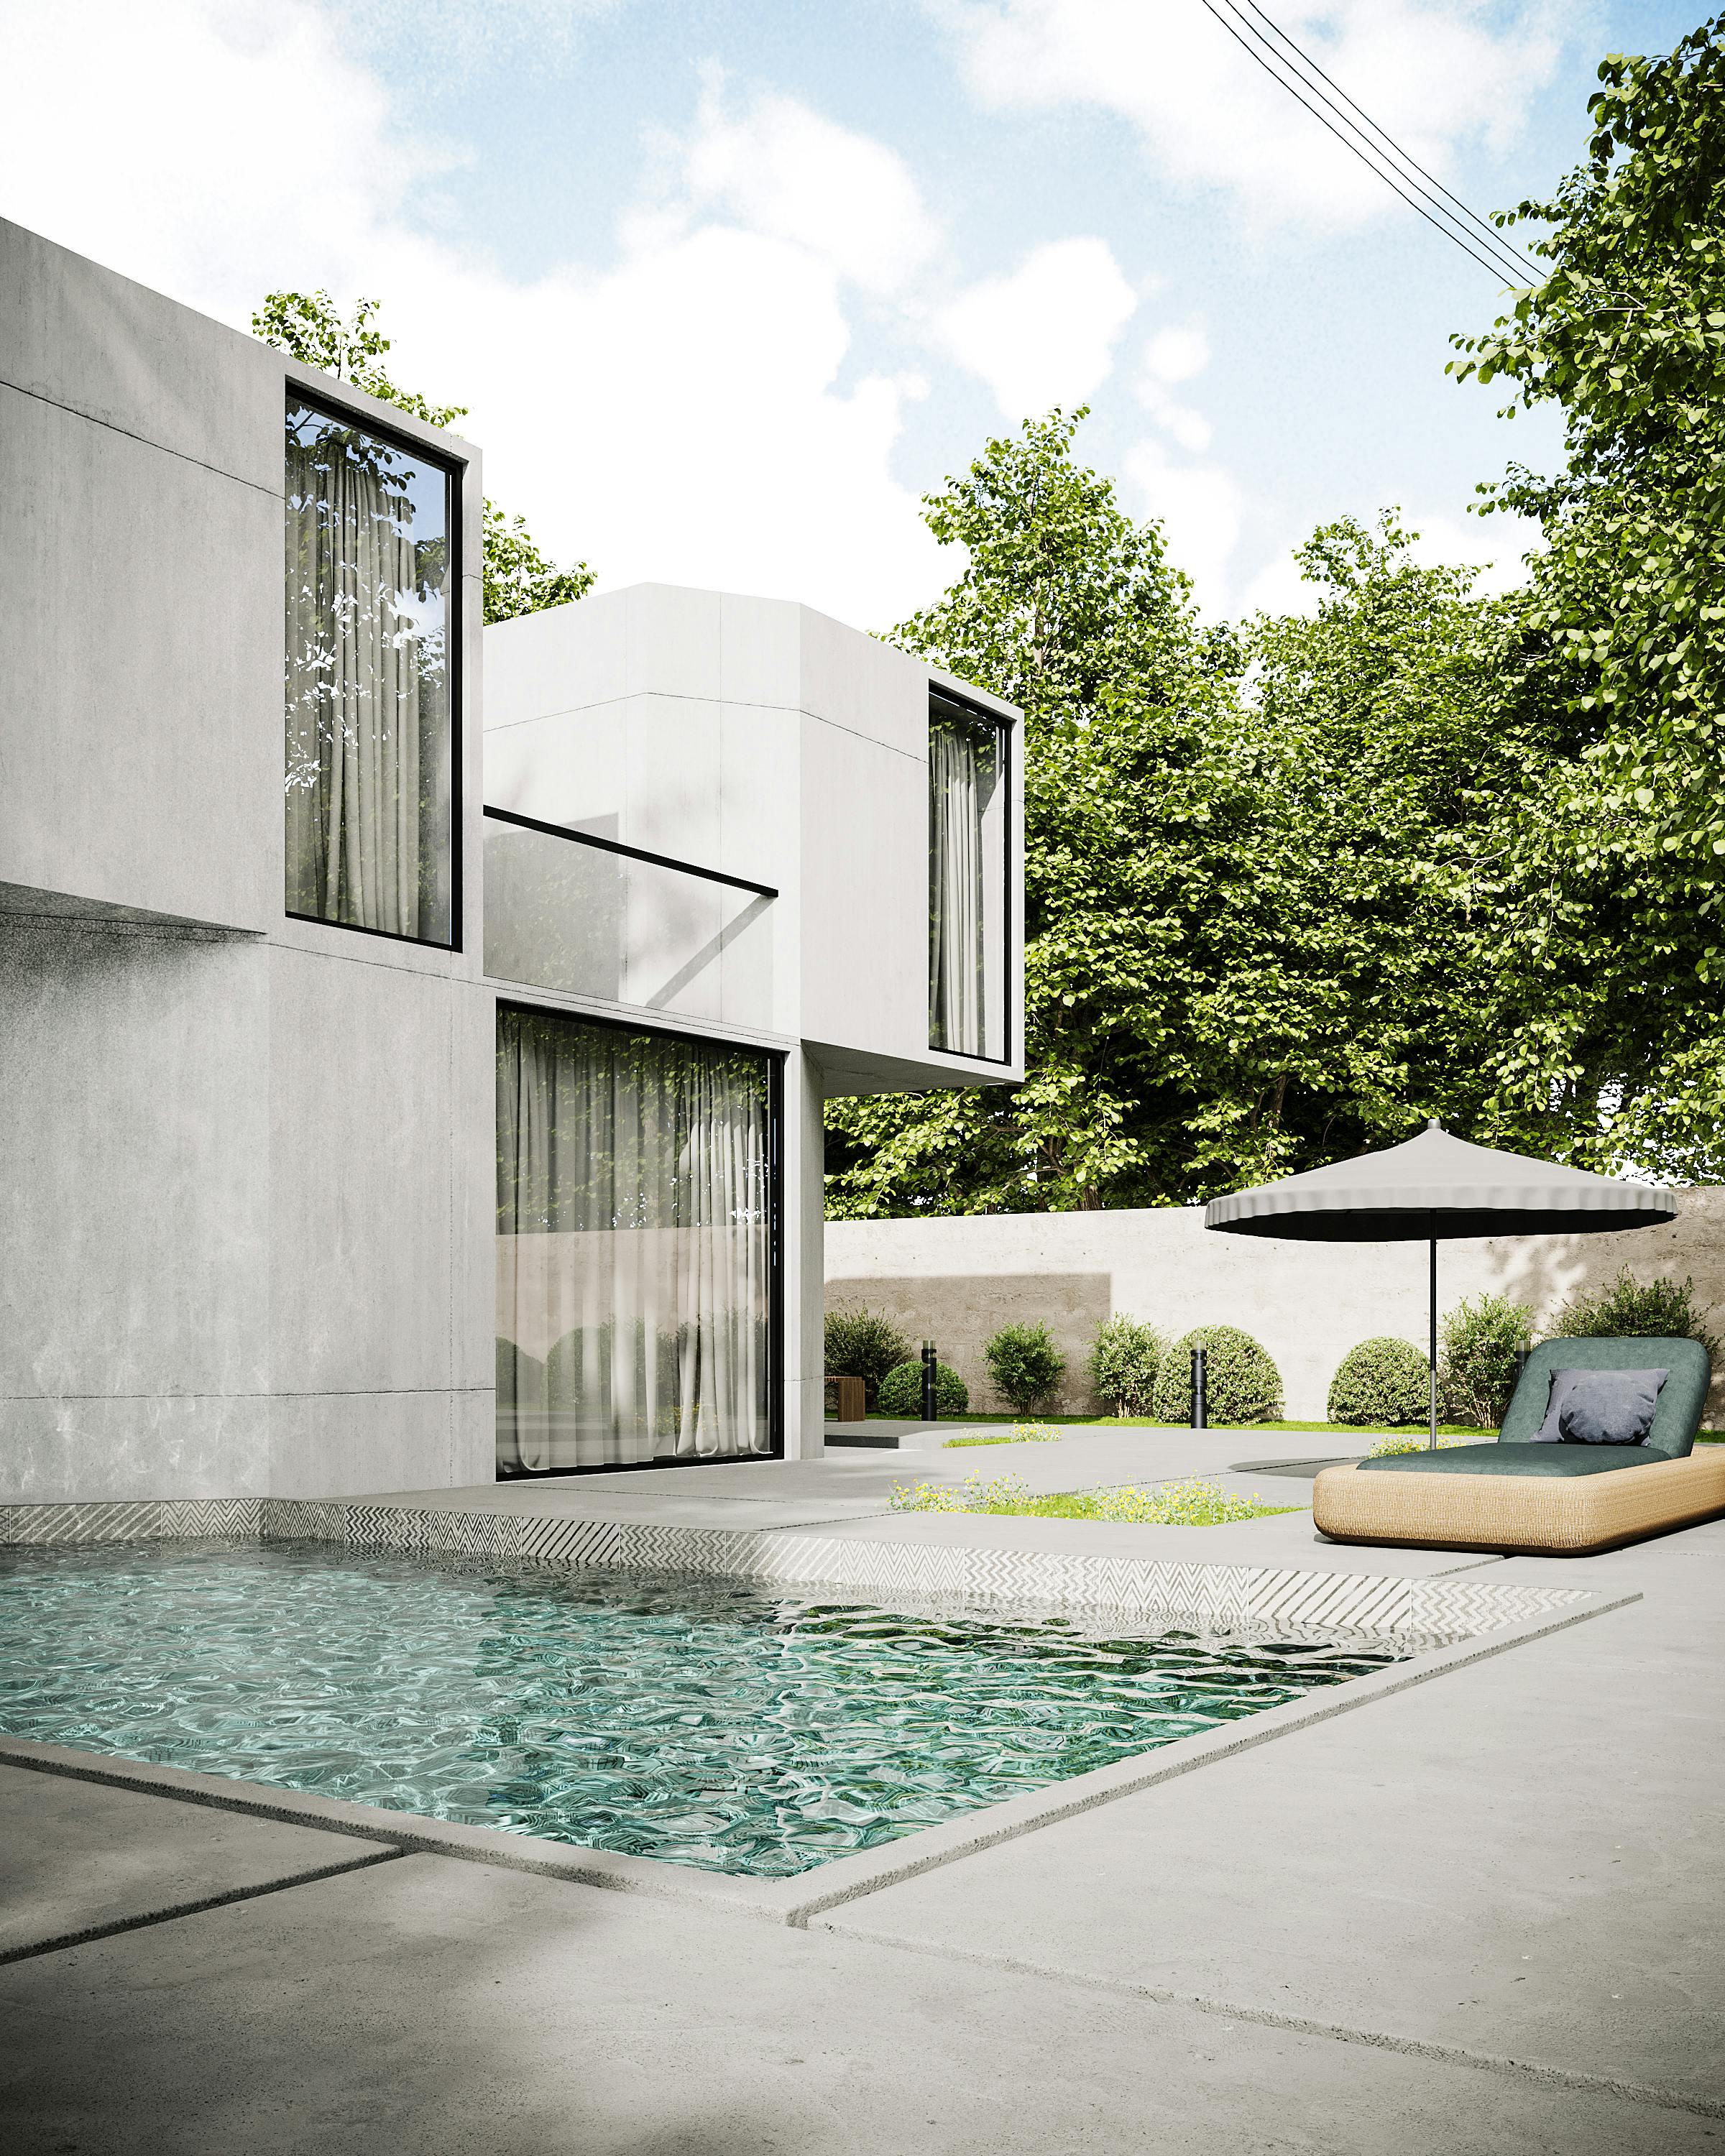 3d visualization of a concrete blocky house with a swimming pool